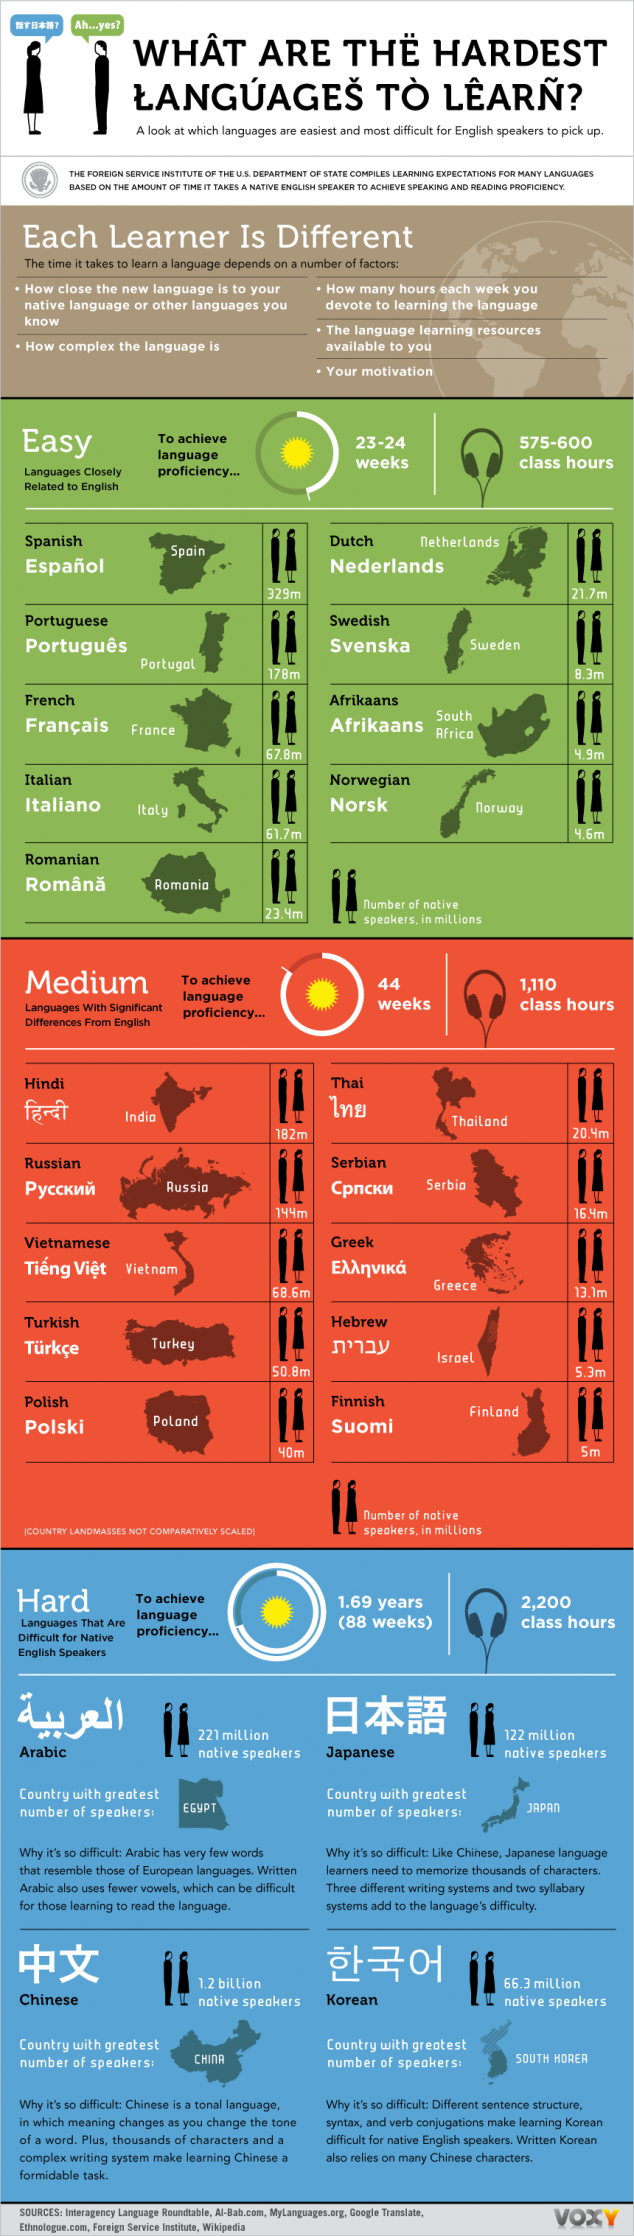 Hardest-Languages-to-Learn